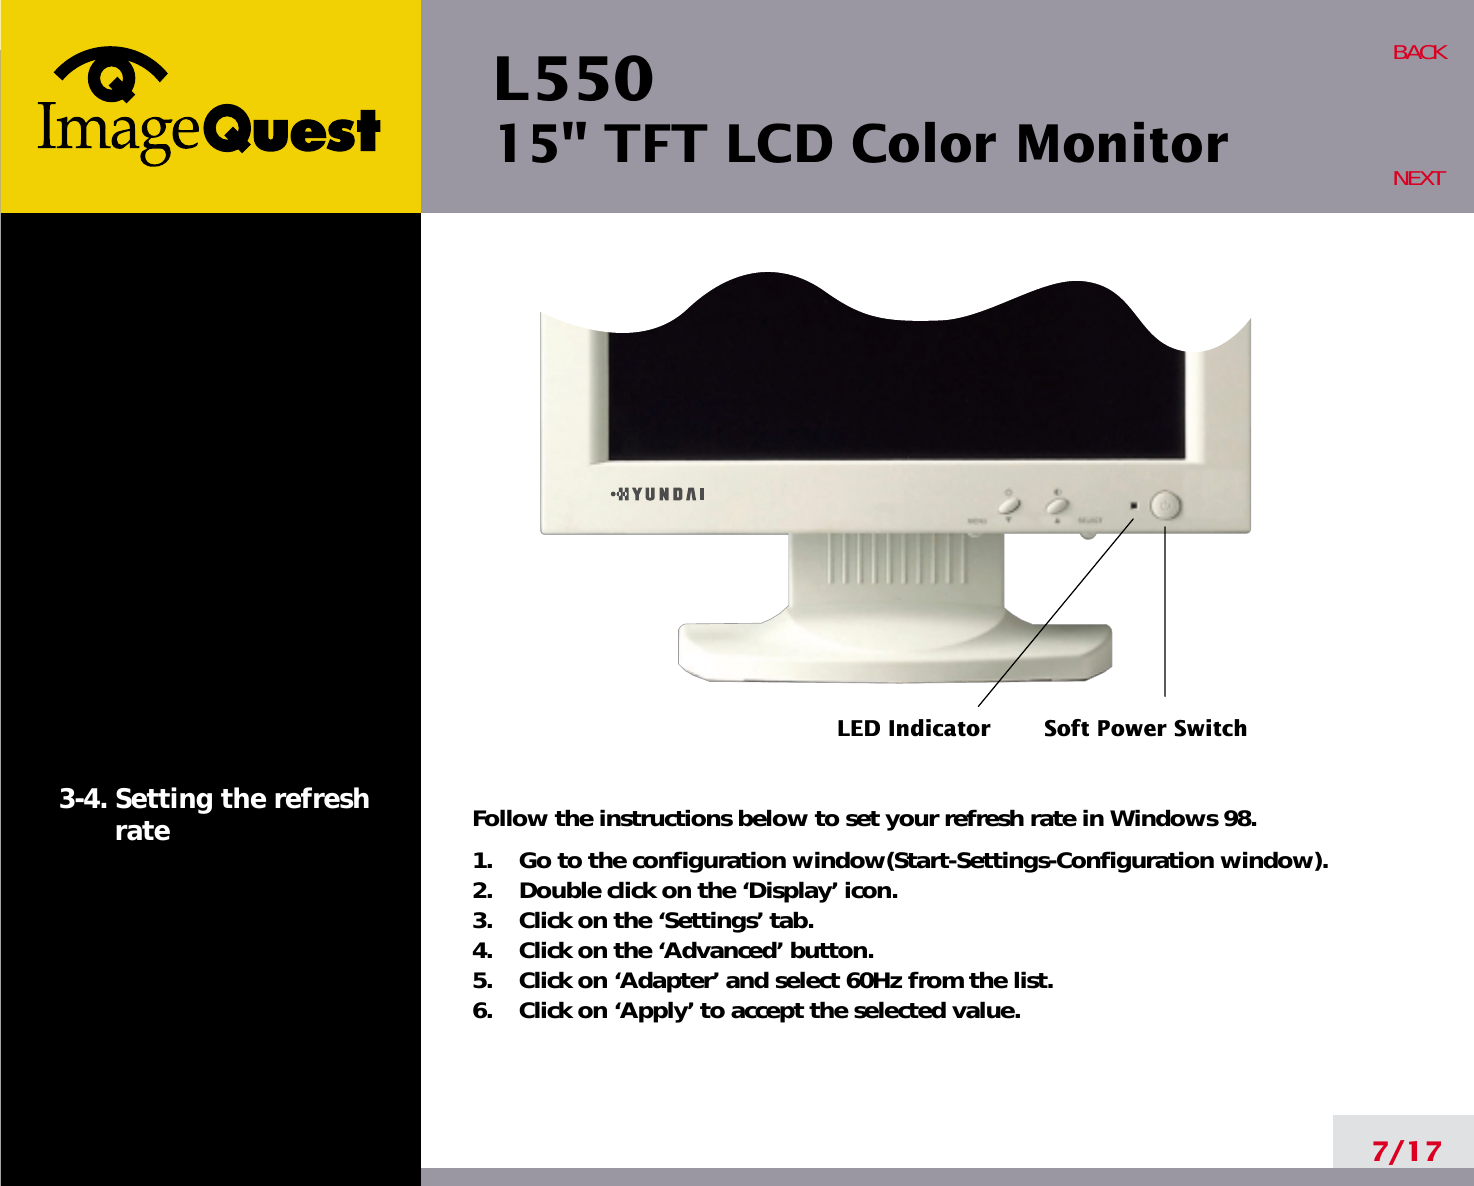 L550 15&quot; TFT LCD Color Monitor7/17BACKNEXT3-4. Setting the refreshrate Follow the instructions below to set your refresh rate in Windows 98.1.    Go to the configuration window(Start-Settings-Configuration window).2.    Double click on the ‘Display’ icon.3.    Click on the ‘Settings’ tab.4.    Click on the ‘Advanced’ button.5.    Click on ‘Adapter’ and select 60Hz from the list.6.    Click on ‘Apply’ to accept the selected value.LED IndicatorSoft Power Switch